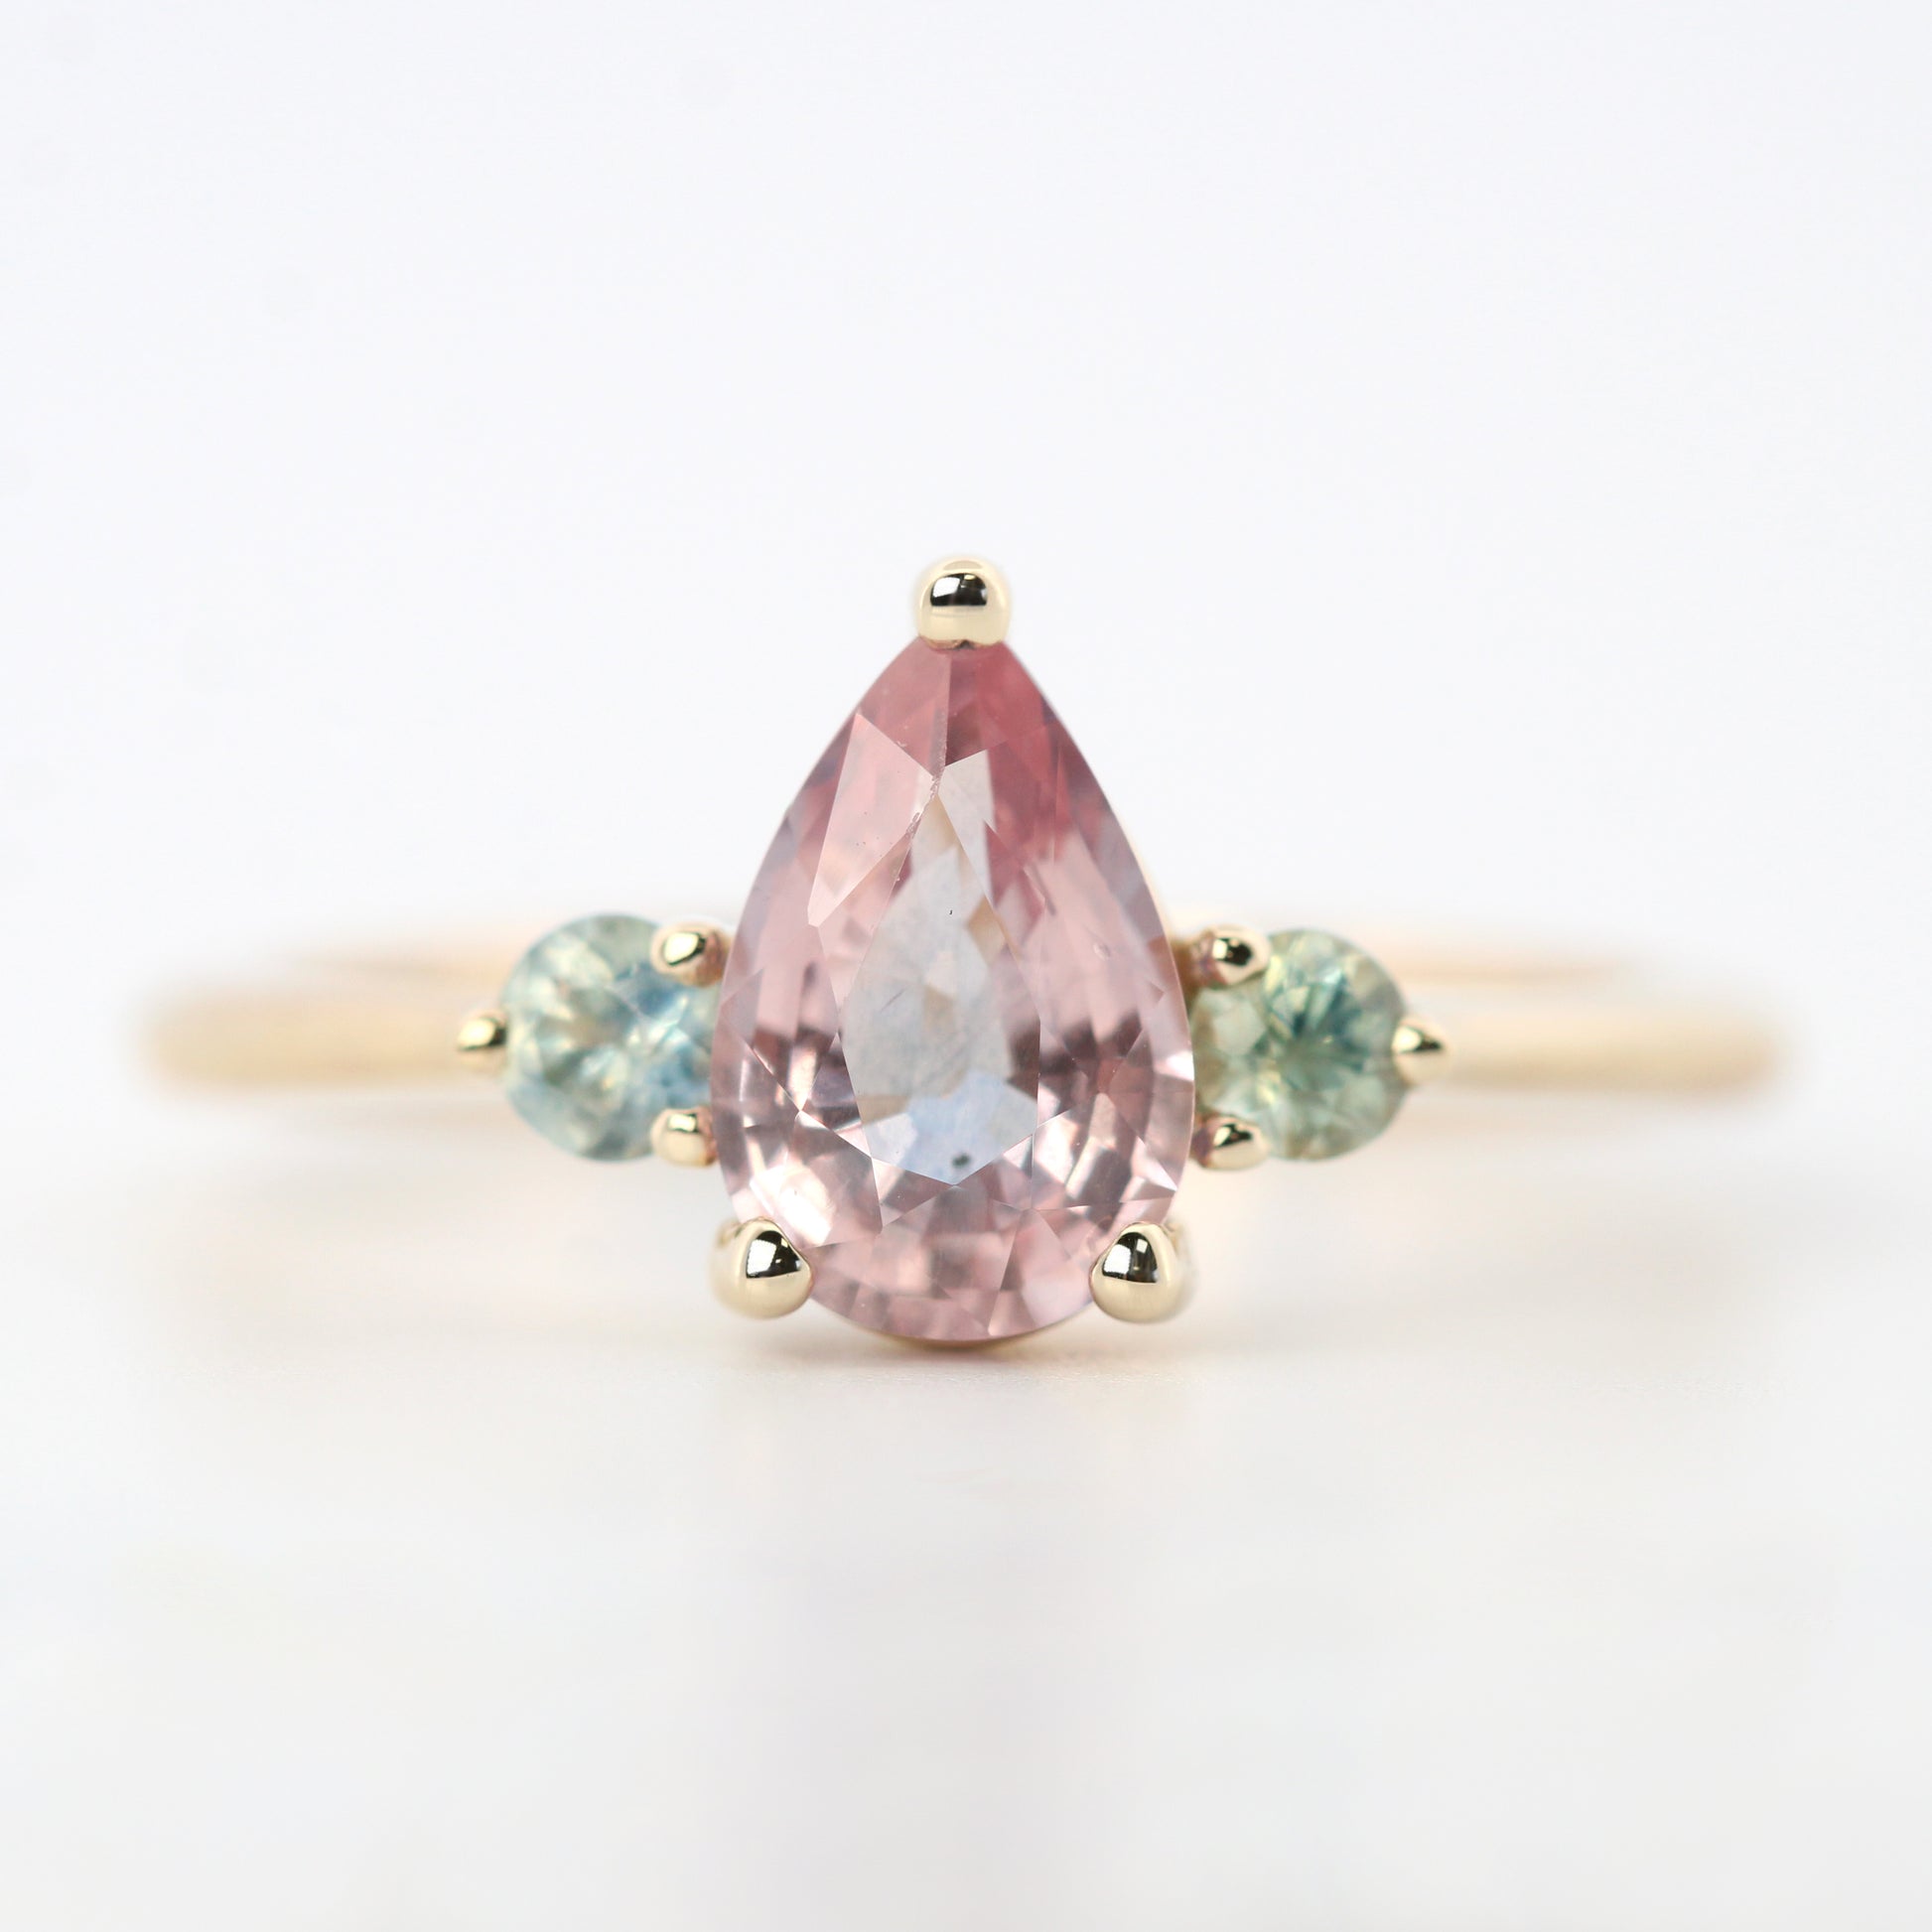 Drea Ring with a 1.40 Carat Clear Pink Pear Sapphire and Sapphire Accents in 14k Yellow Gold - Ready to Size and Ship - Midwinter Co. Alternative Bridal Rings and Modern Fine Jewelry